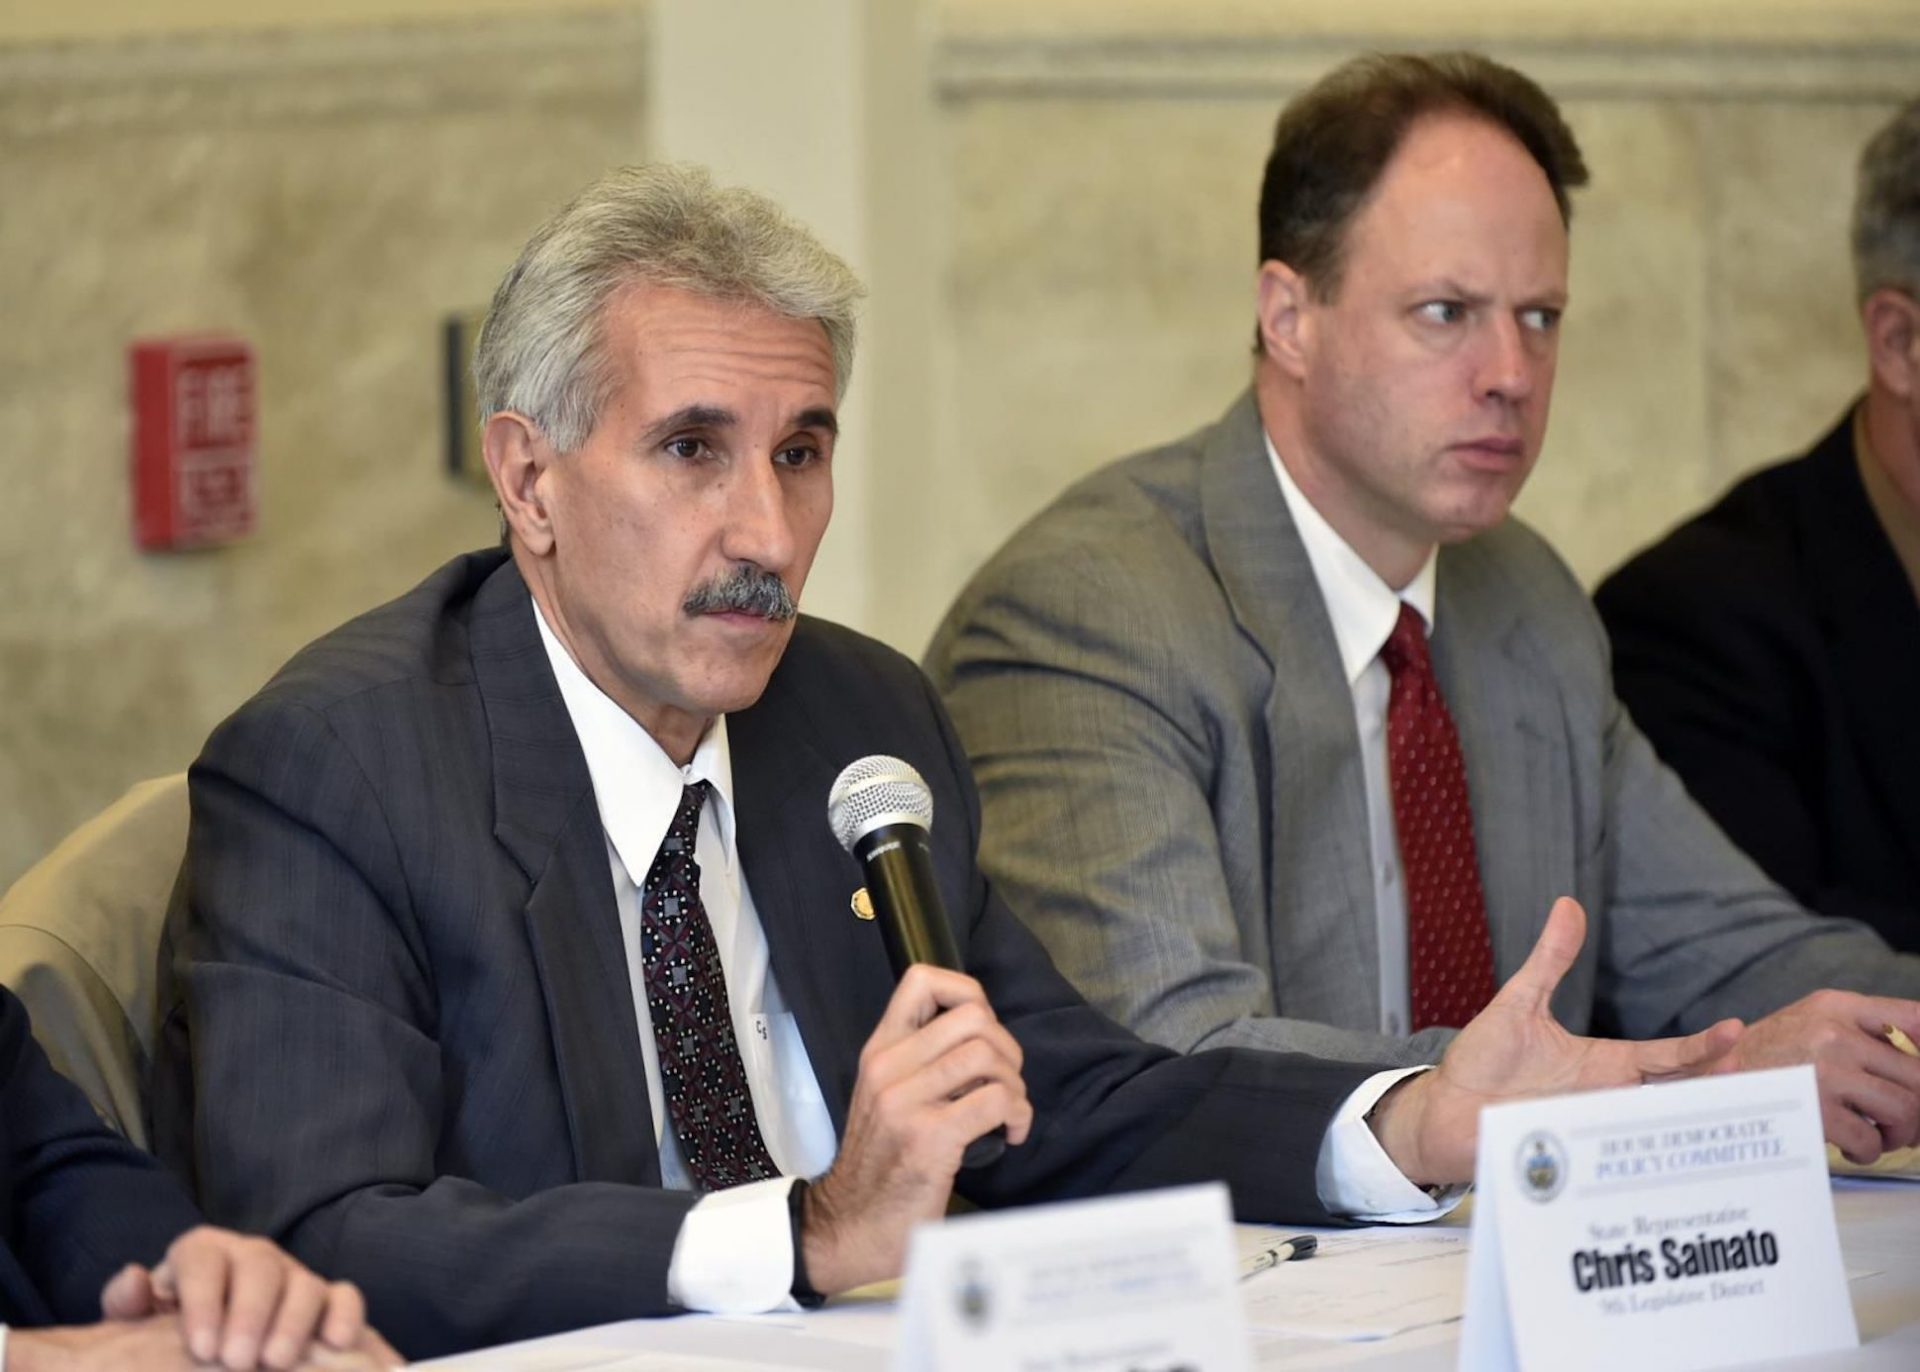 Democratic Reps. Chris Sainato (left) and Mark Longietti were the only two lawmakers to take in more than $200,000 each in per diems from 2017 to 2020.